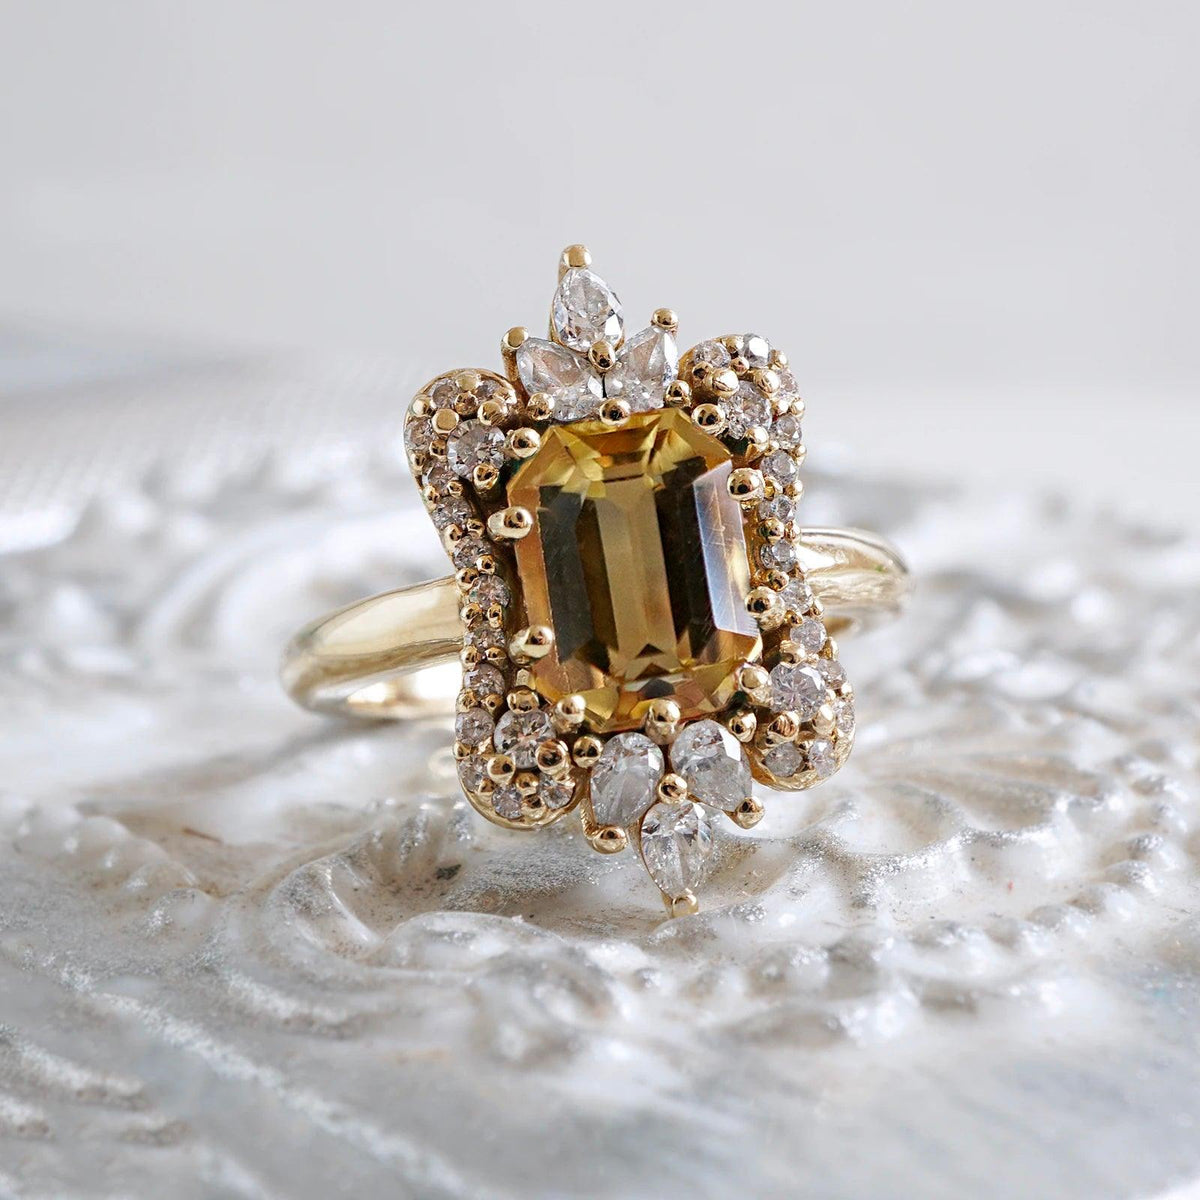 Eleanor Citrine Diamond Ring in 14K and 18K Gold, and Platinum - Tippy Taste Jewelry